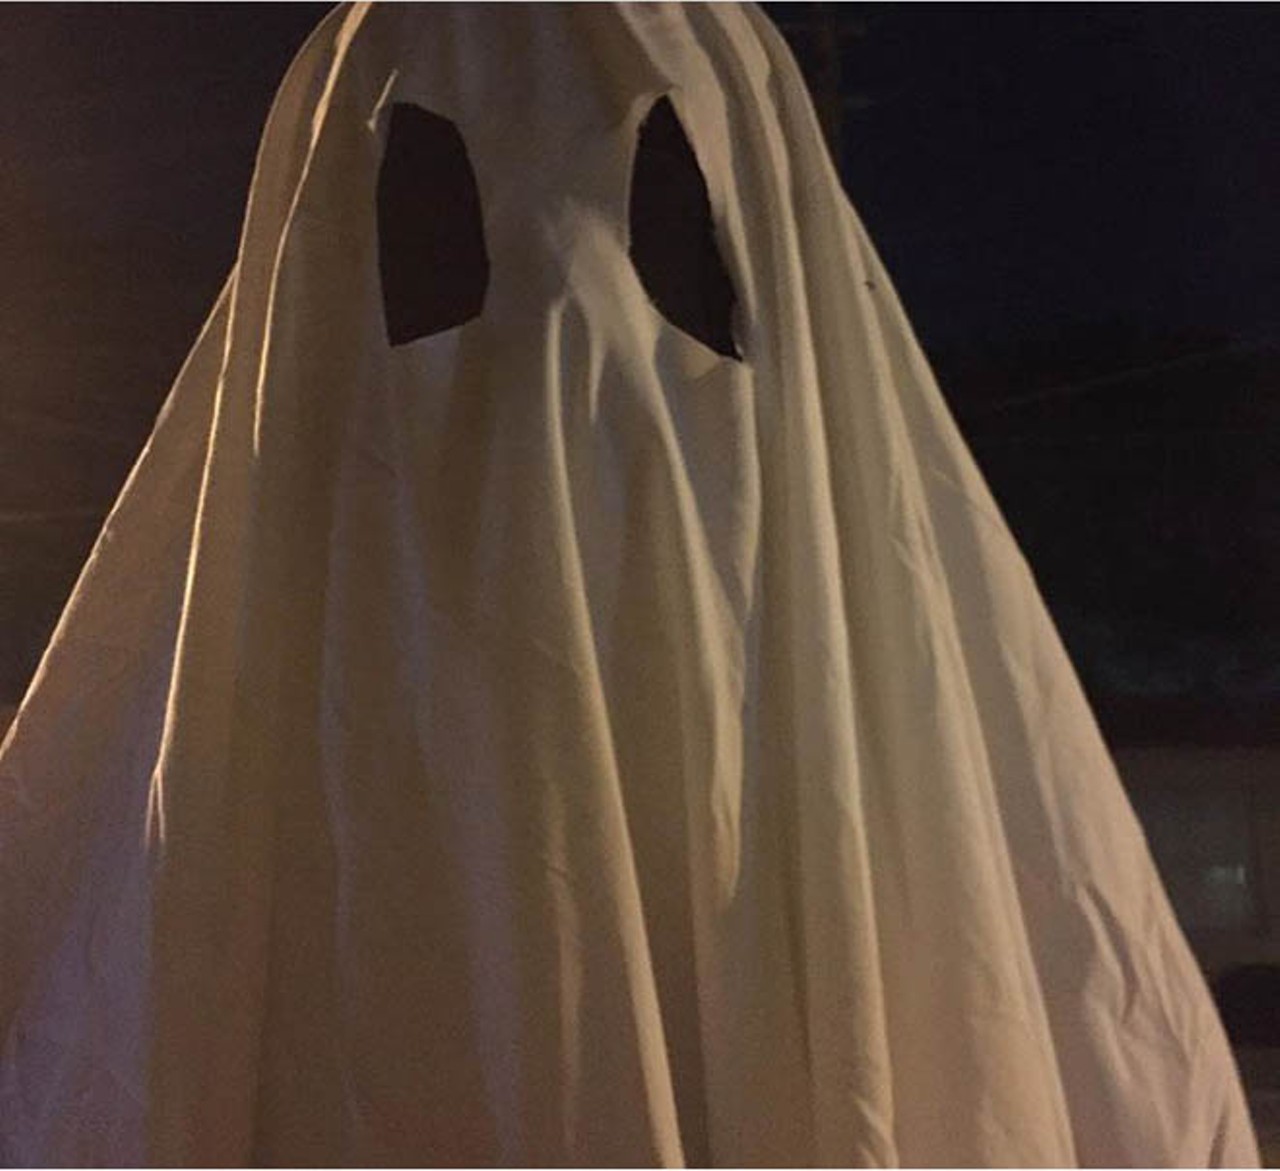 22 photos of the best costumes from Haunt Around The Hood